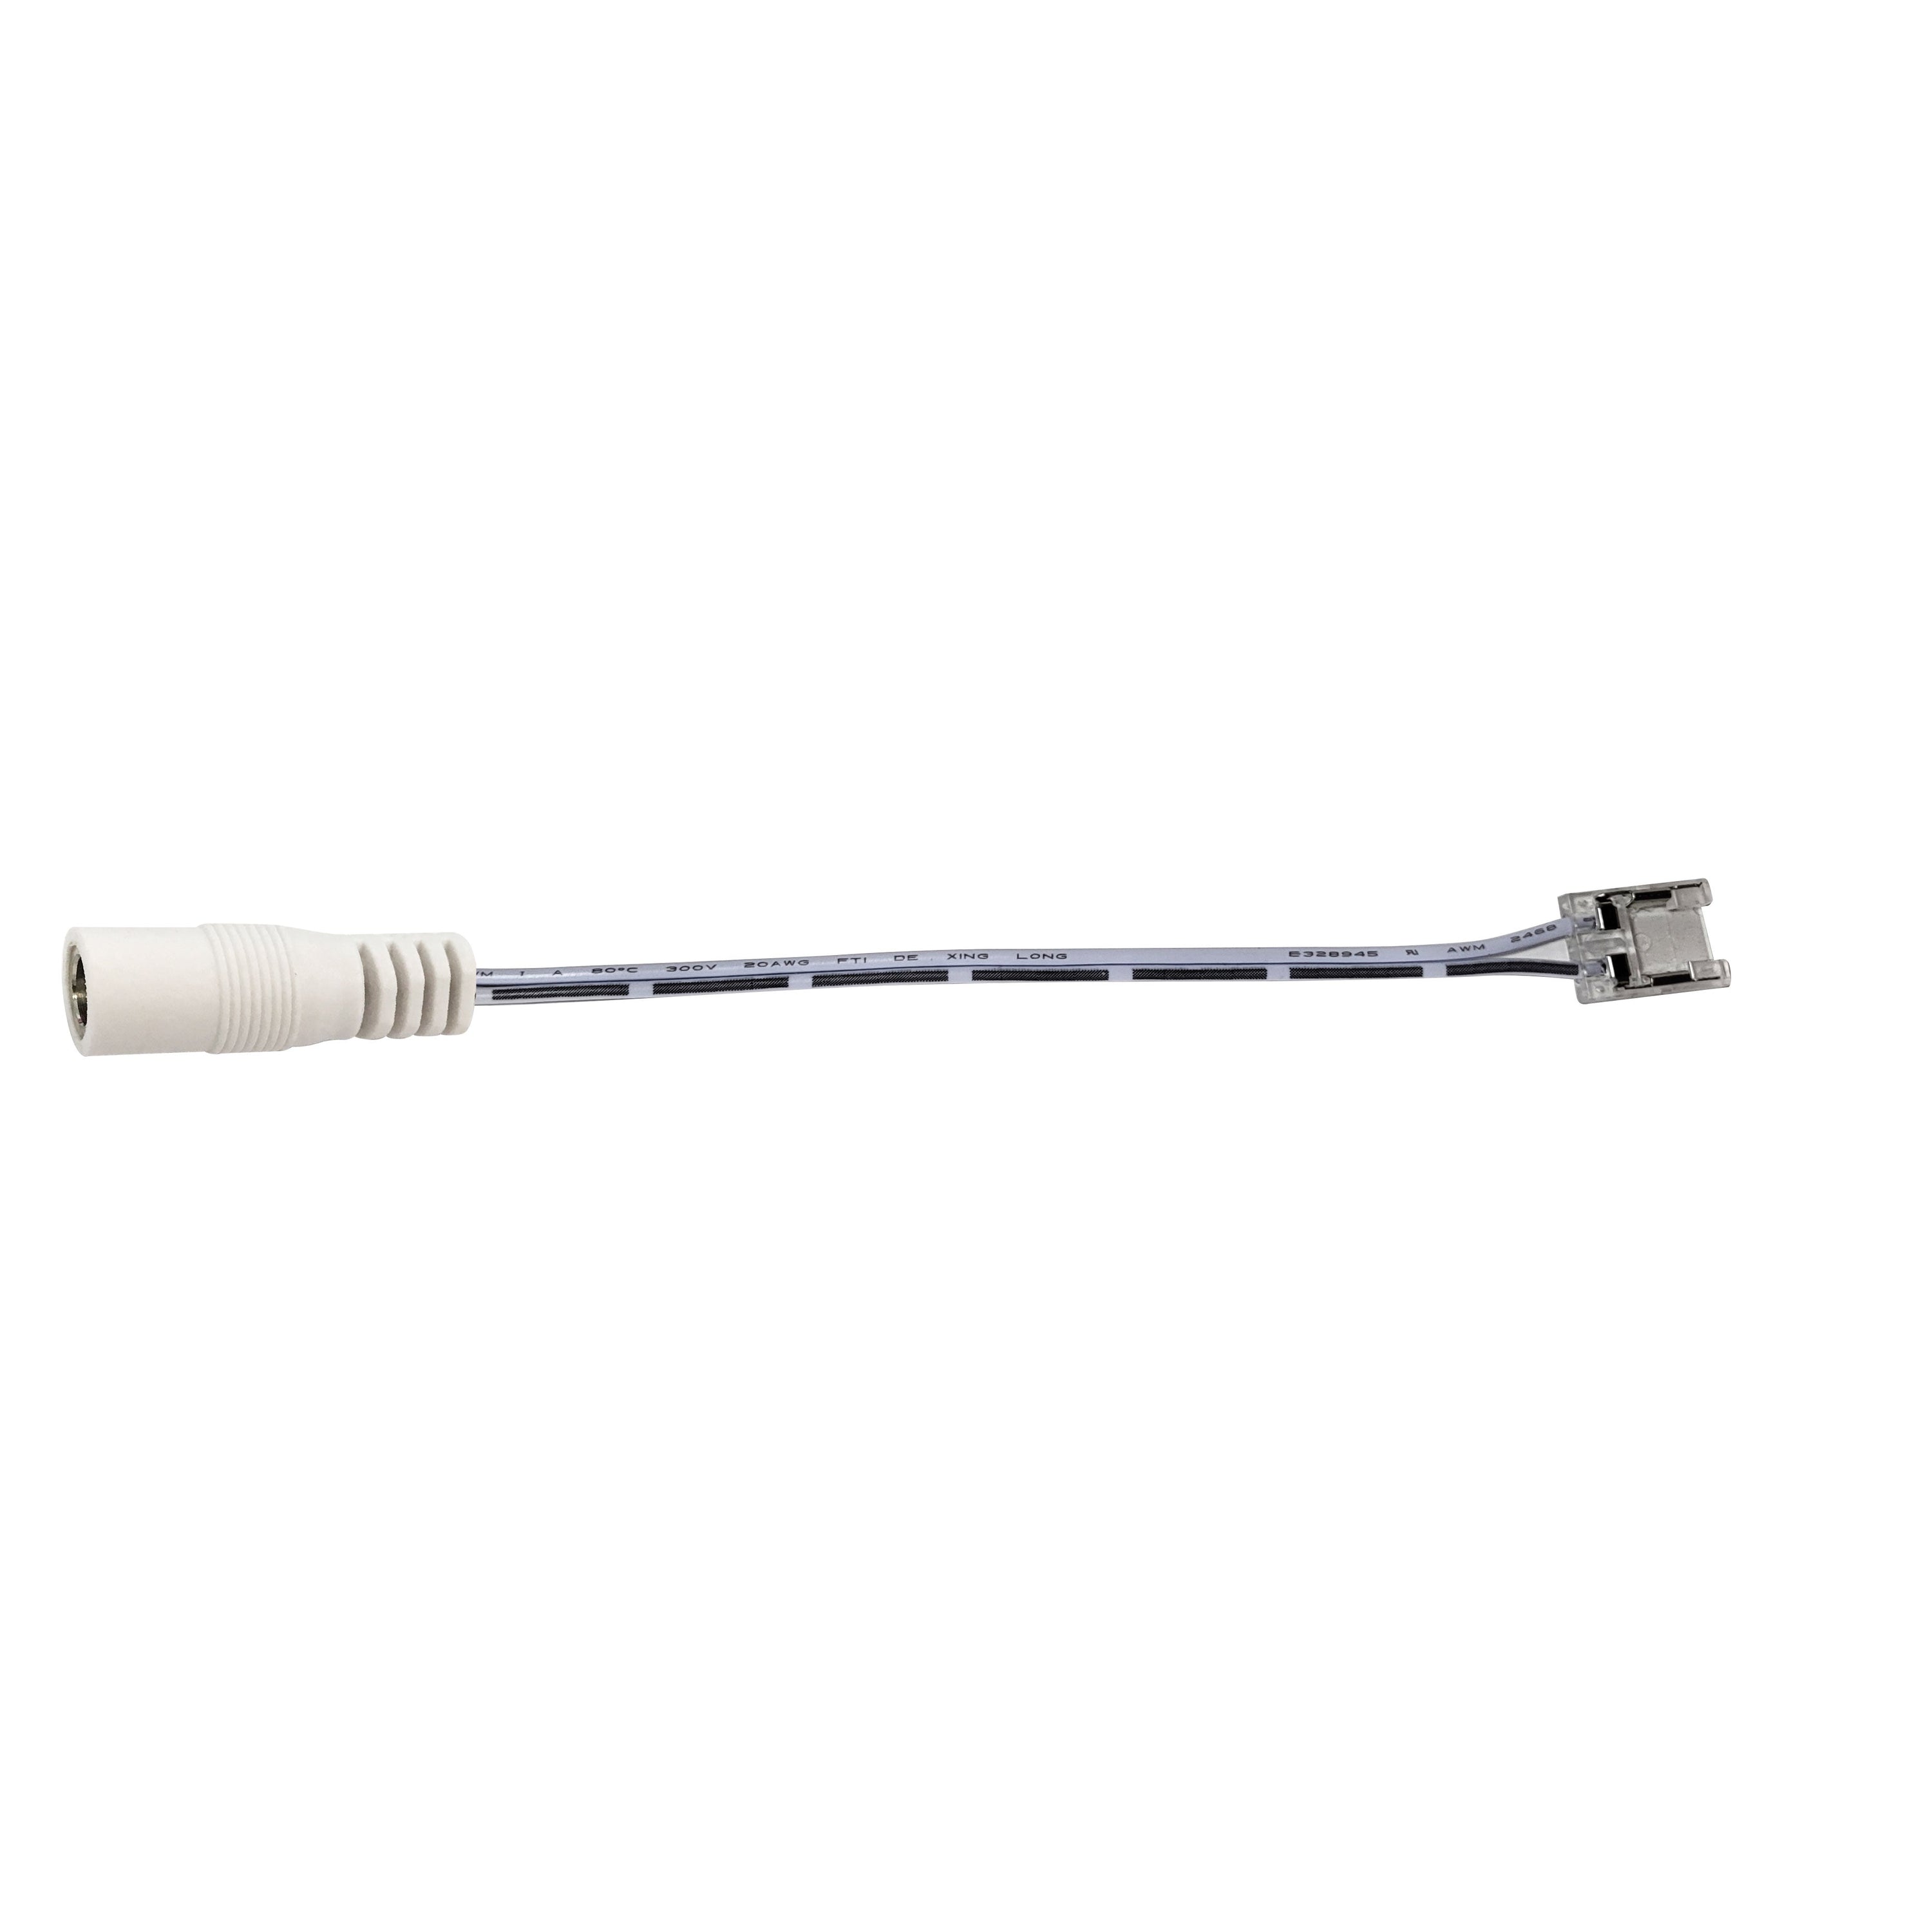 Nora Lighting NATLCB-708/BC - Accent / Undercabinet - 6 Inch Power Cord w/Power Line Connector for NUTP14 COB Tape Light